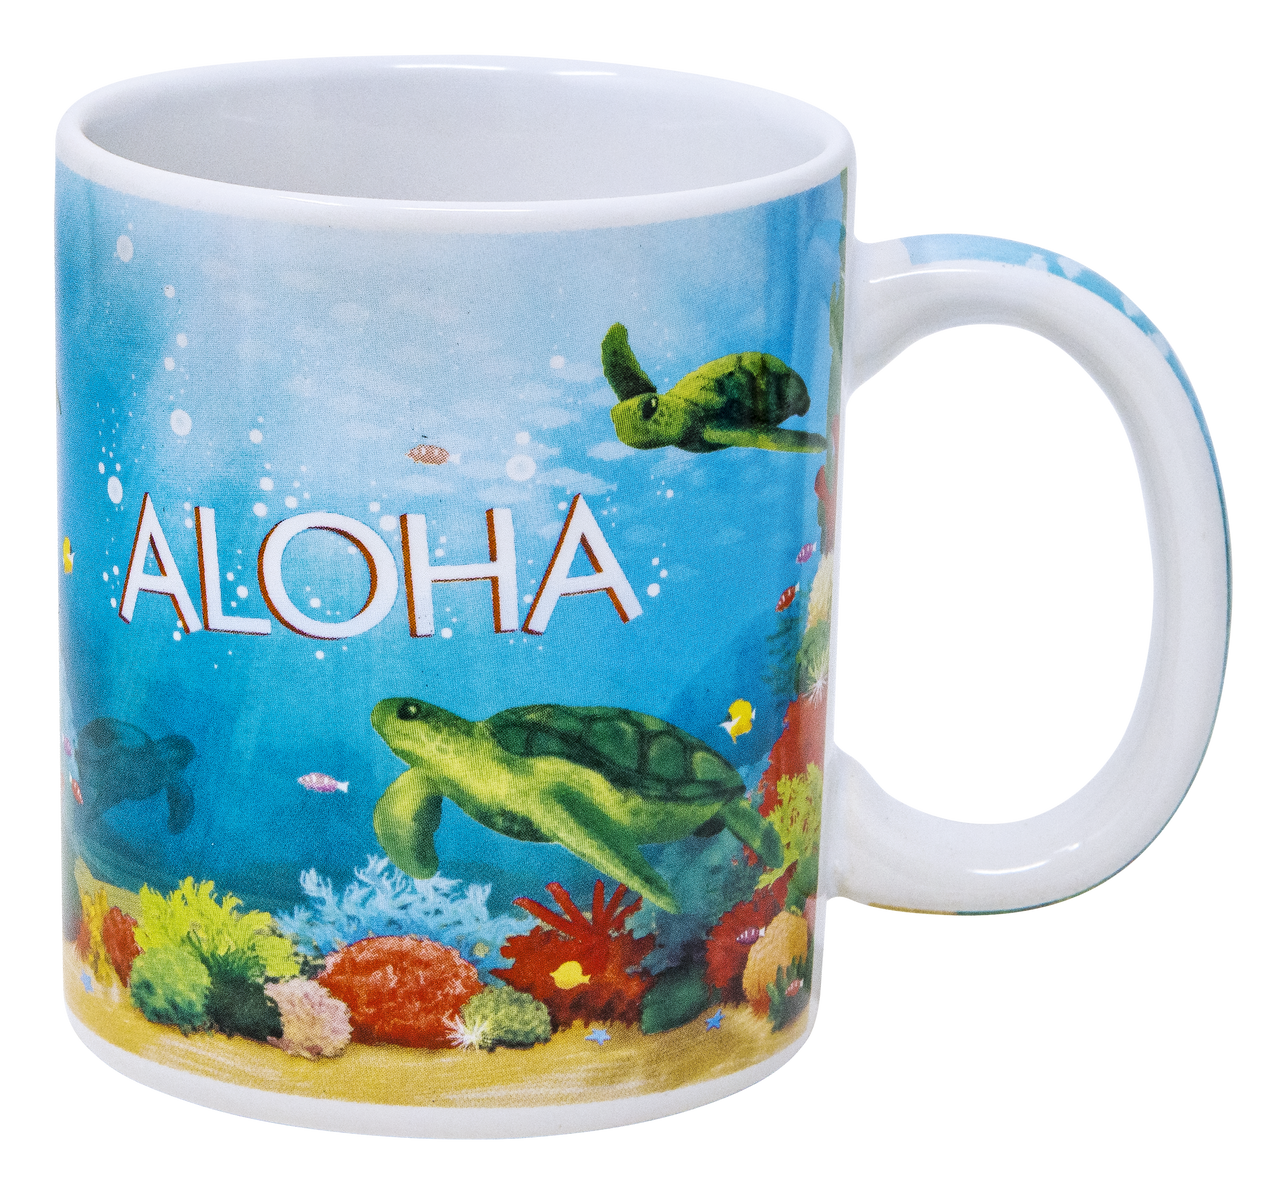 https://cdn11.bigcommerce.com/s-do3nxddvbo/images/stencil/1280x1280/products/4735/8538/ISCM-CeramicMug-UnderTheSea__27931.1661300096.png?c=1